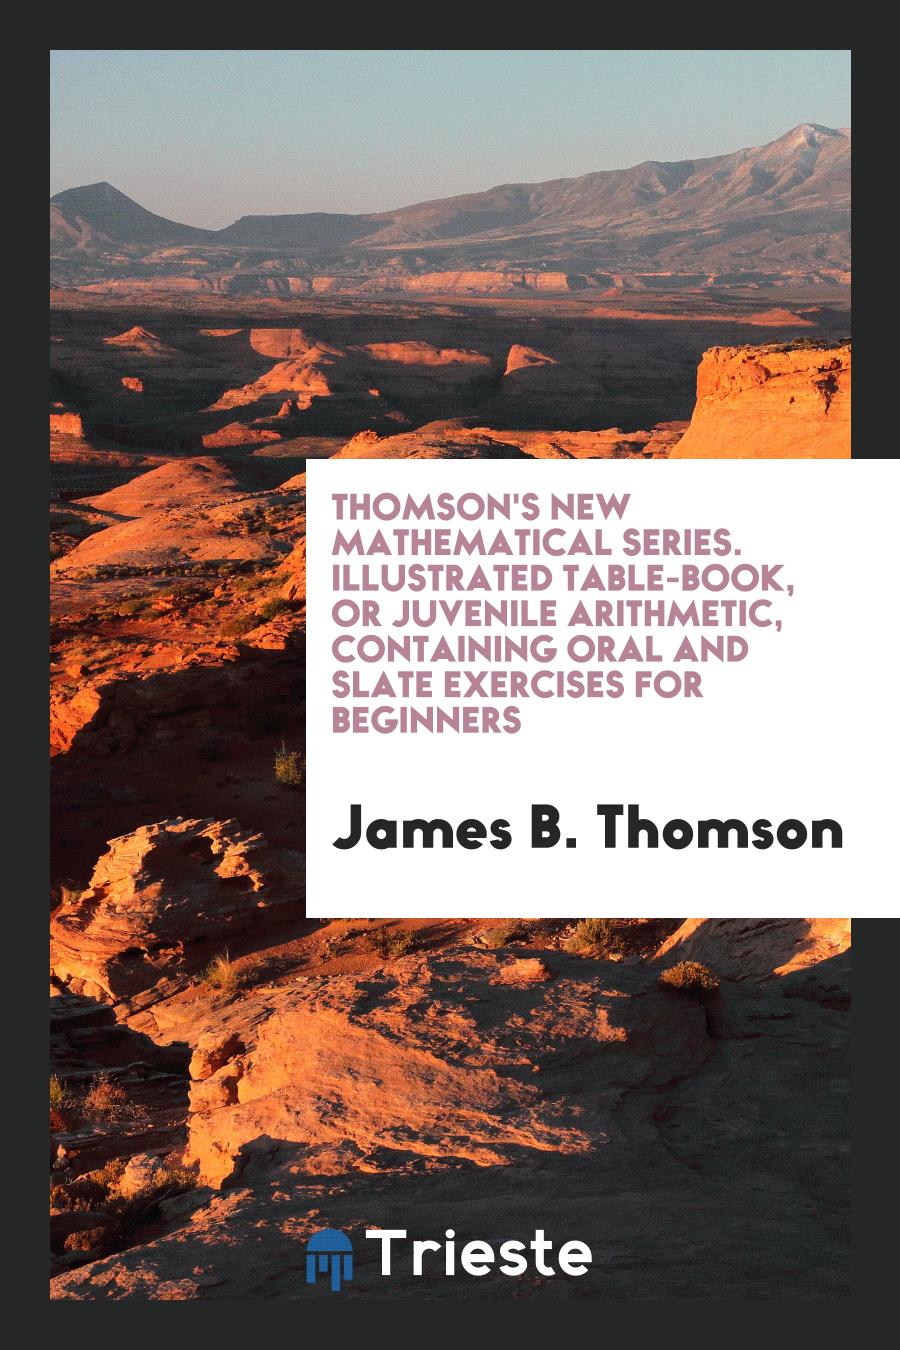 Thomson's New Mathematical Series. Illustrated Table-Book, or Juvenile Arithmetic, Containing Oral and Slate Exercises for Beginners